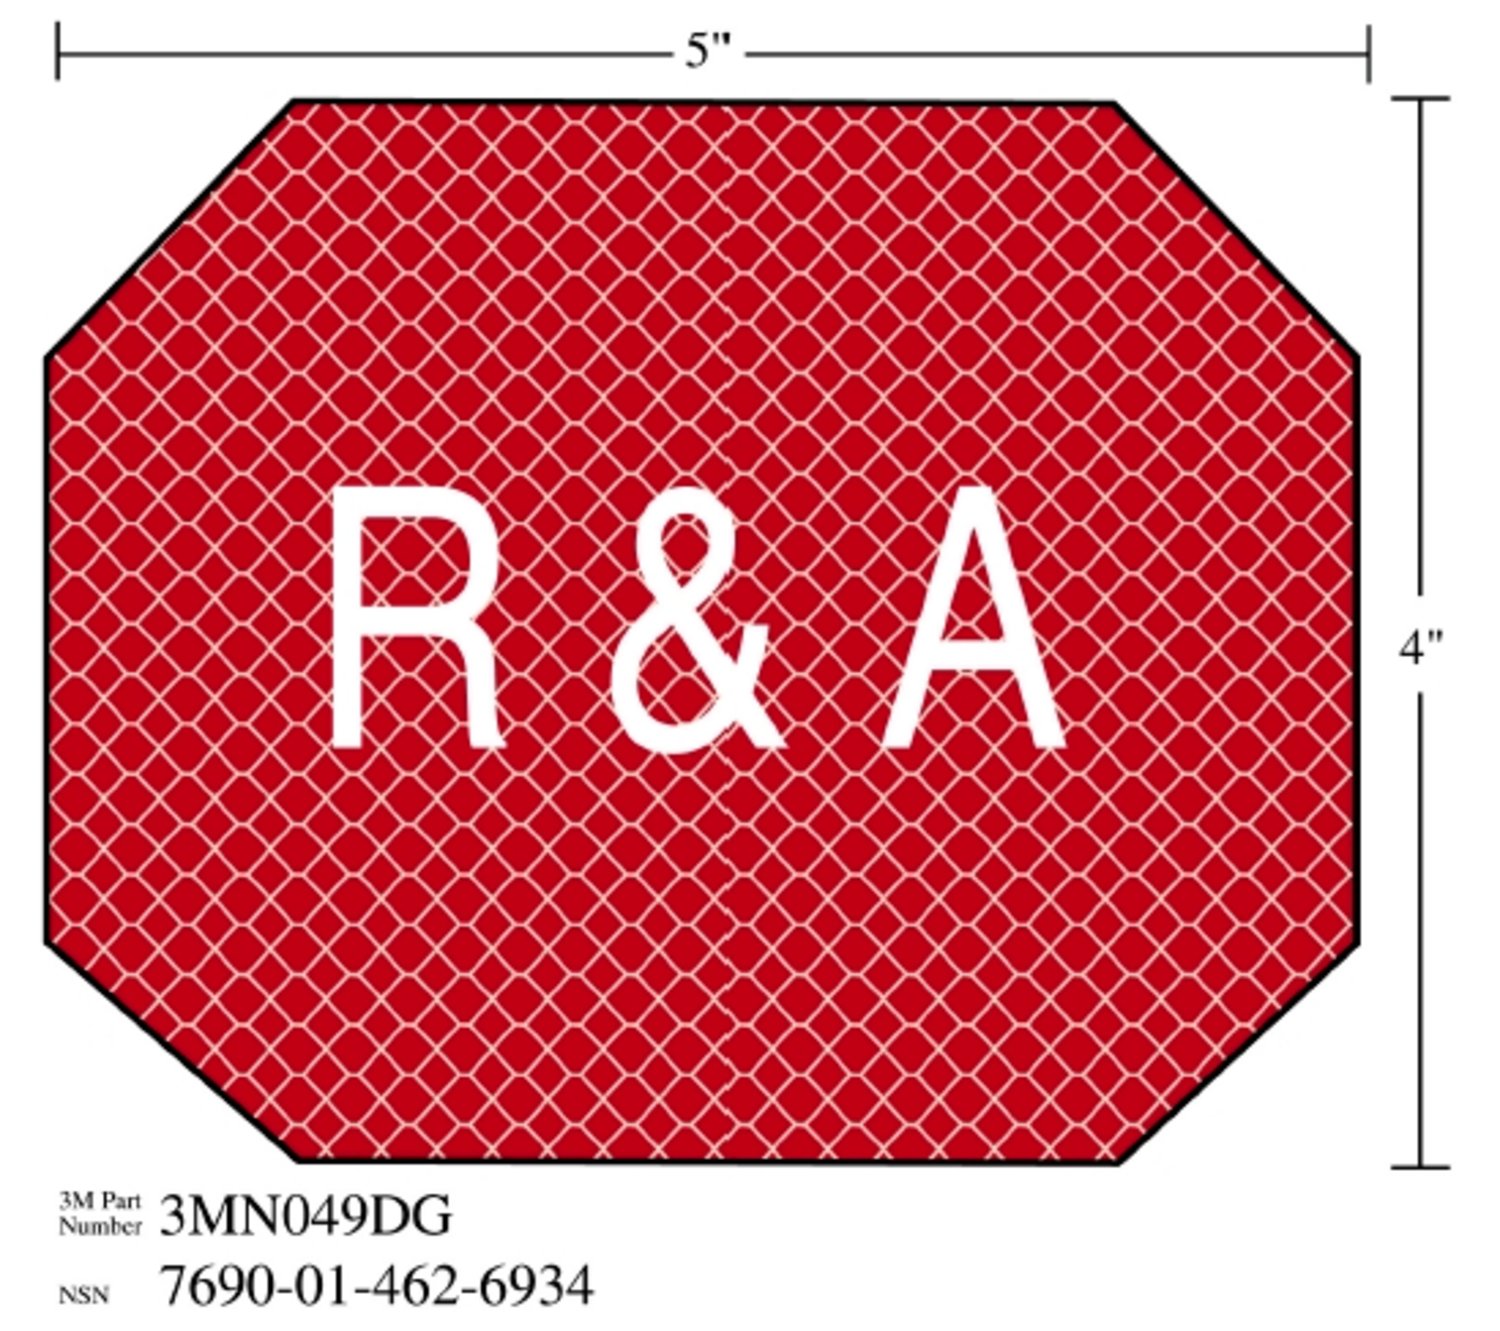 7010317678 - 3M Diamond Grade Damage Control Sign 3MN049DG, "R&A", 5 in x 4 in,
10/Package